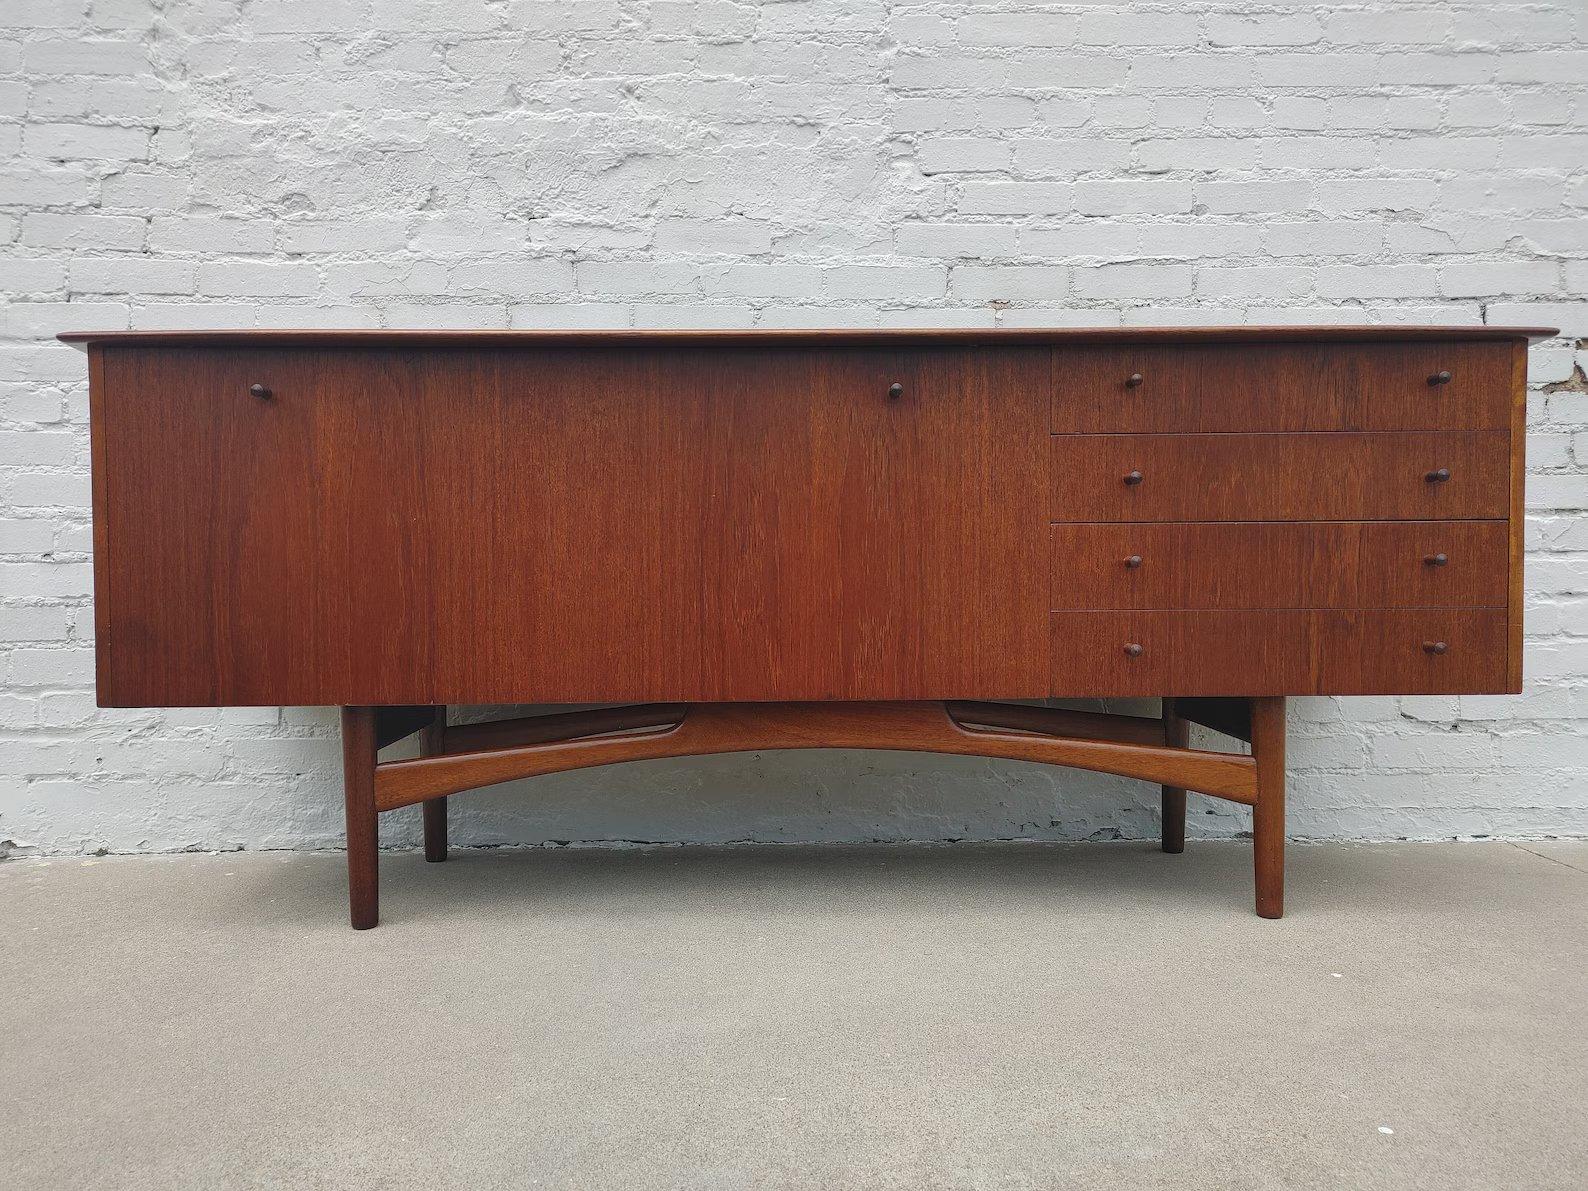 Mid Century Modern English Teak Sideboard

Most likely by Younger from England.  Above average vintage condition and structurally sound. Has some expected slight finish wear and scratching. Top has been refinished and does not have original factory